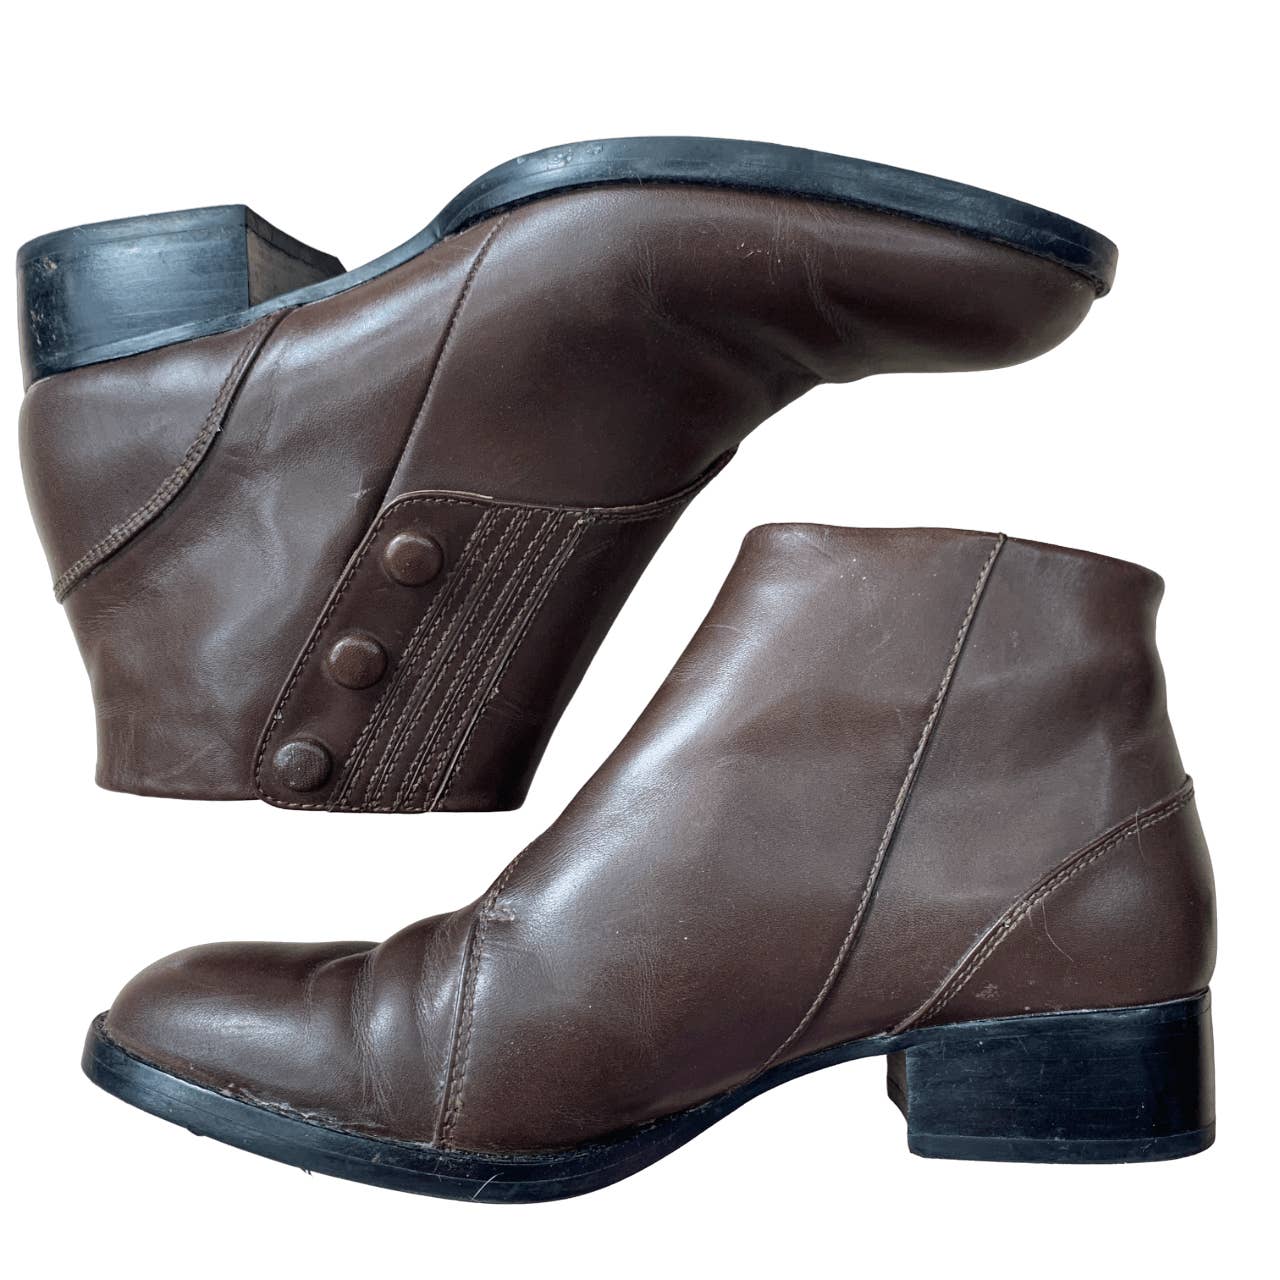 Ariat 'Spat' Ankle Boots in Brown - Woman's 11